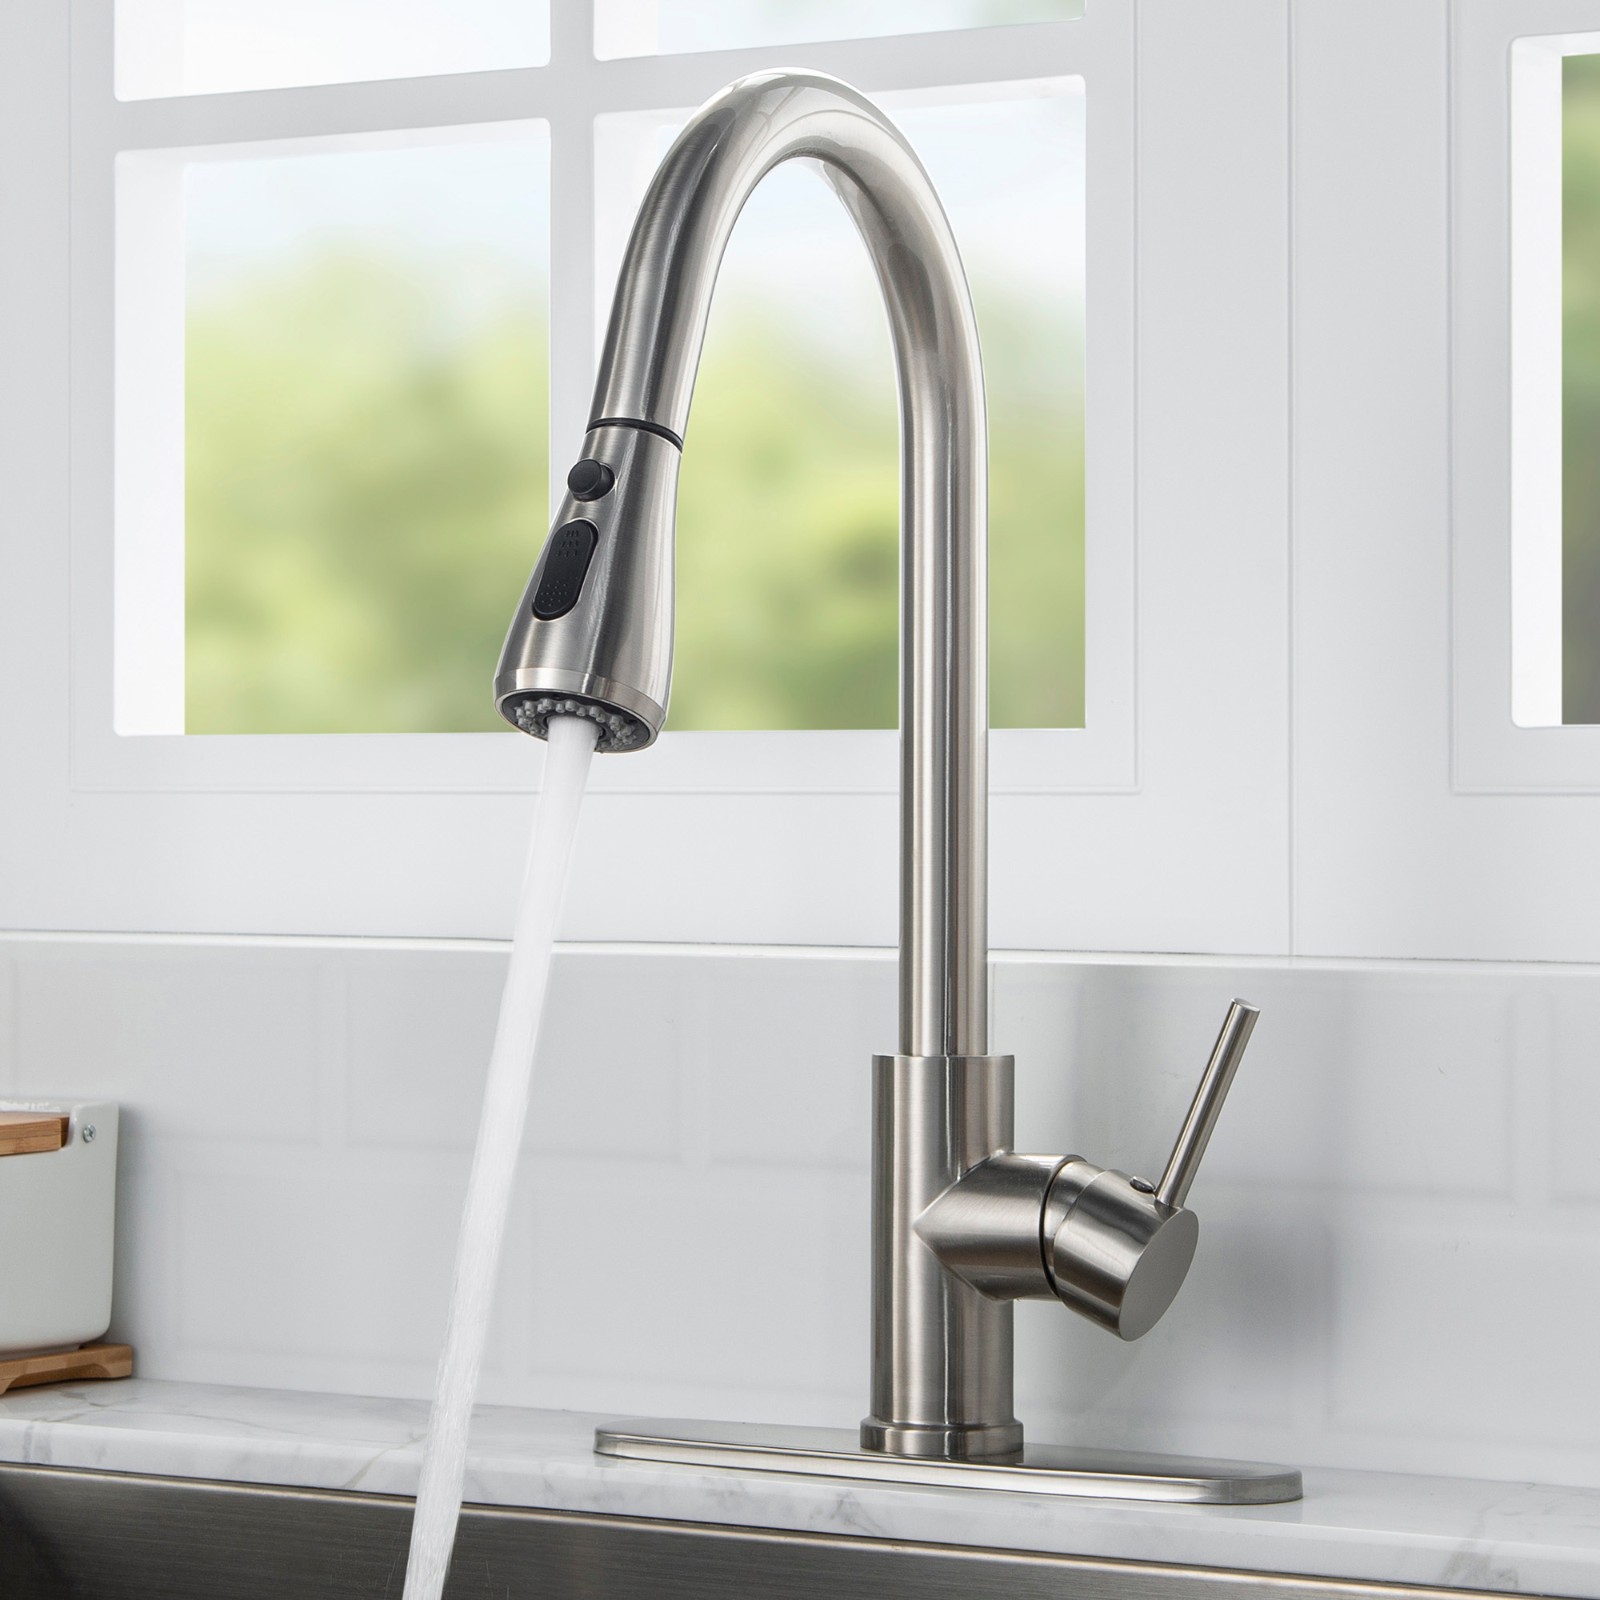  WOODBRIDGE WK090802BN Single Handle Pull Down Kitchen Faucet in Brushed Nickel Finish_5015